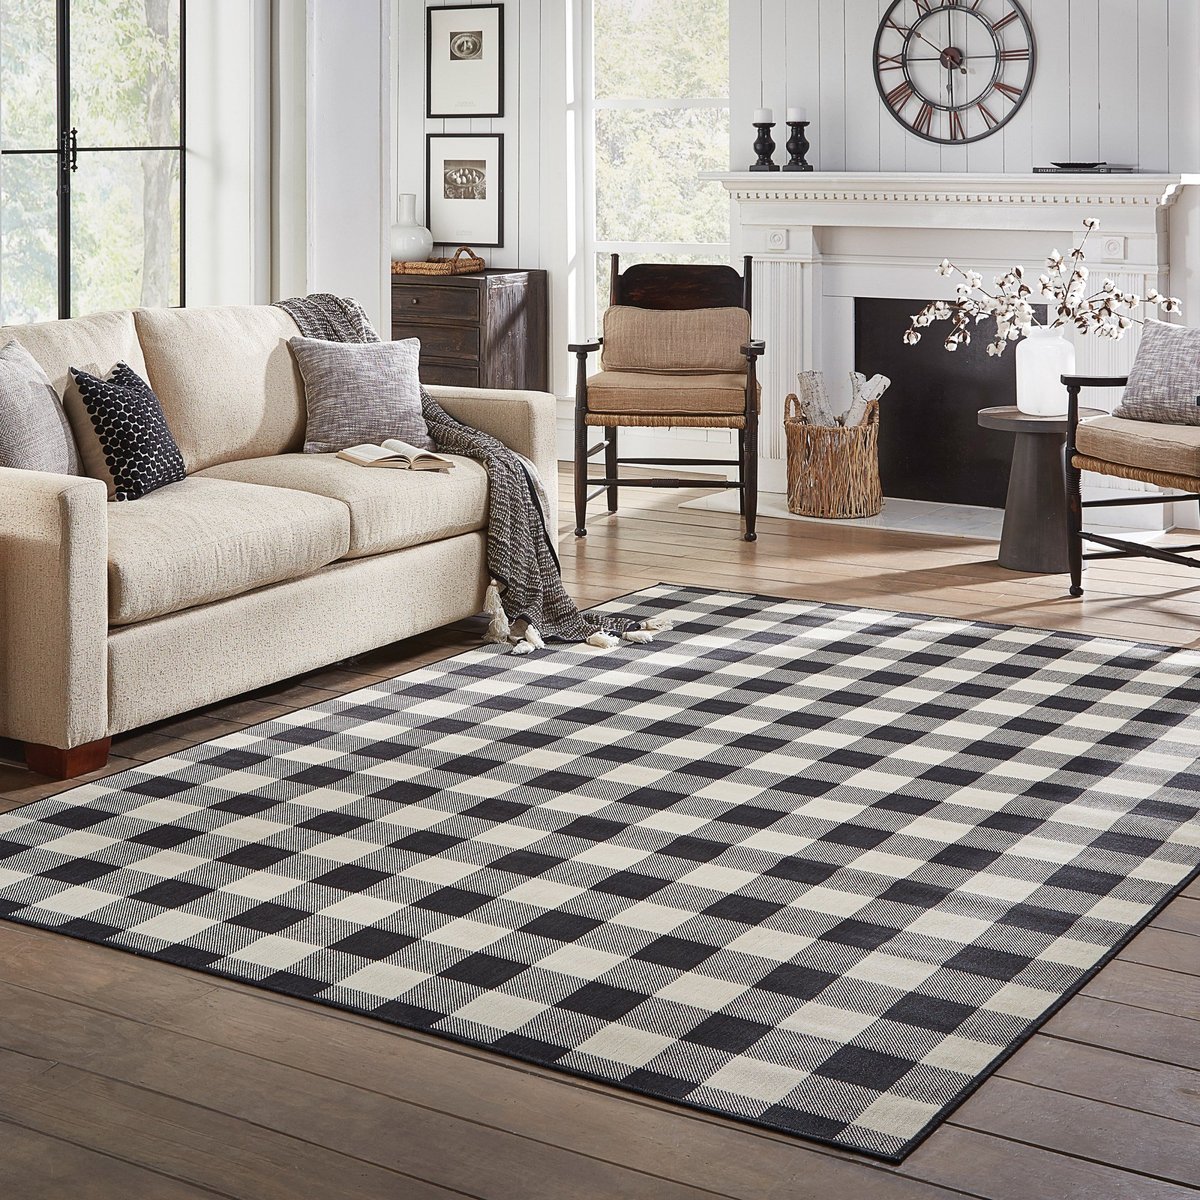 Classic Checkered - Country Living Room Ideas